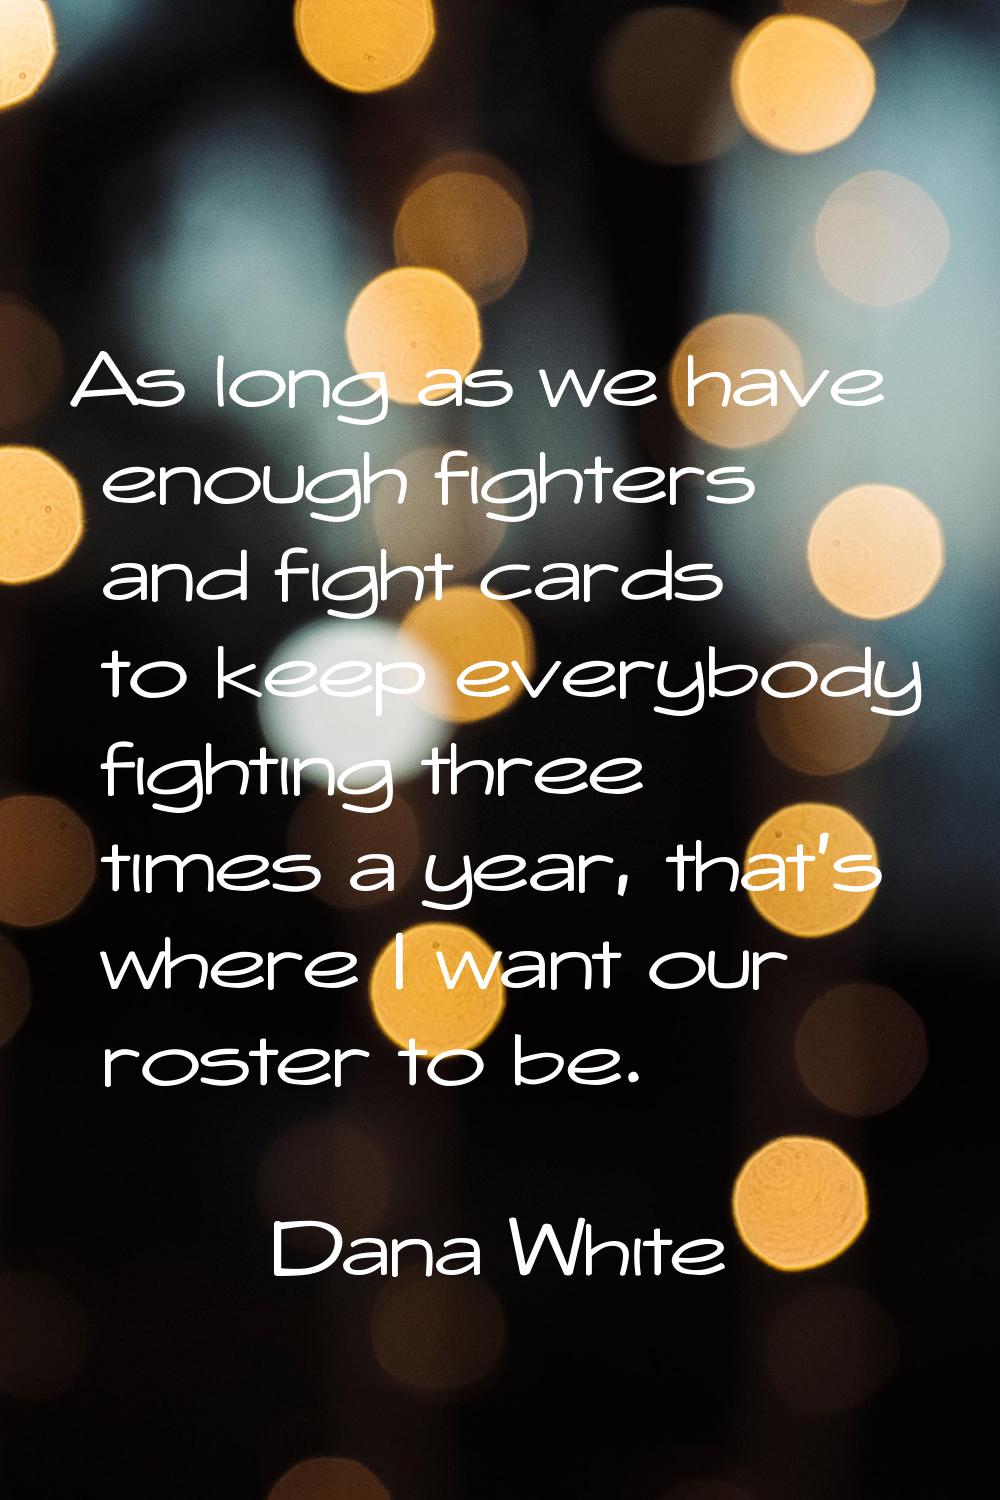 As long as we have enough fighters and fight cards to keep everybody fighting three times a year, t